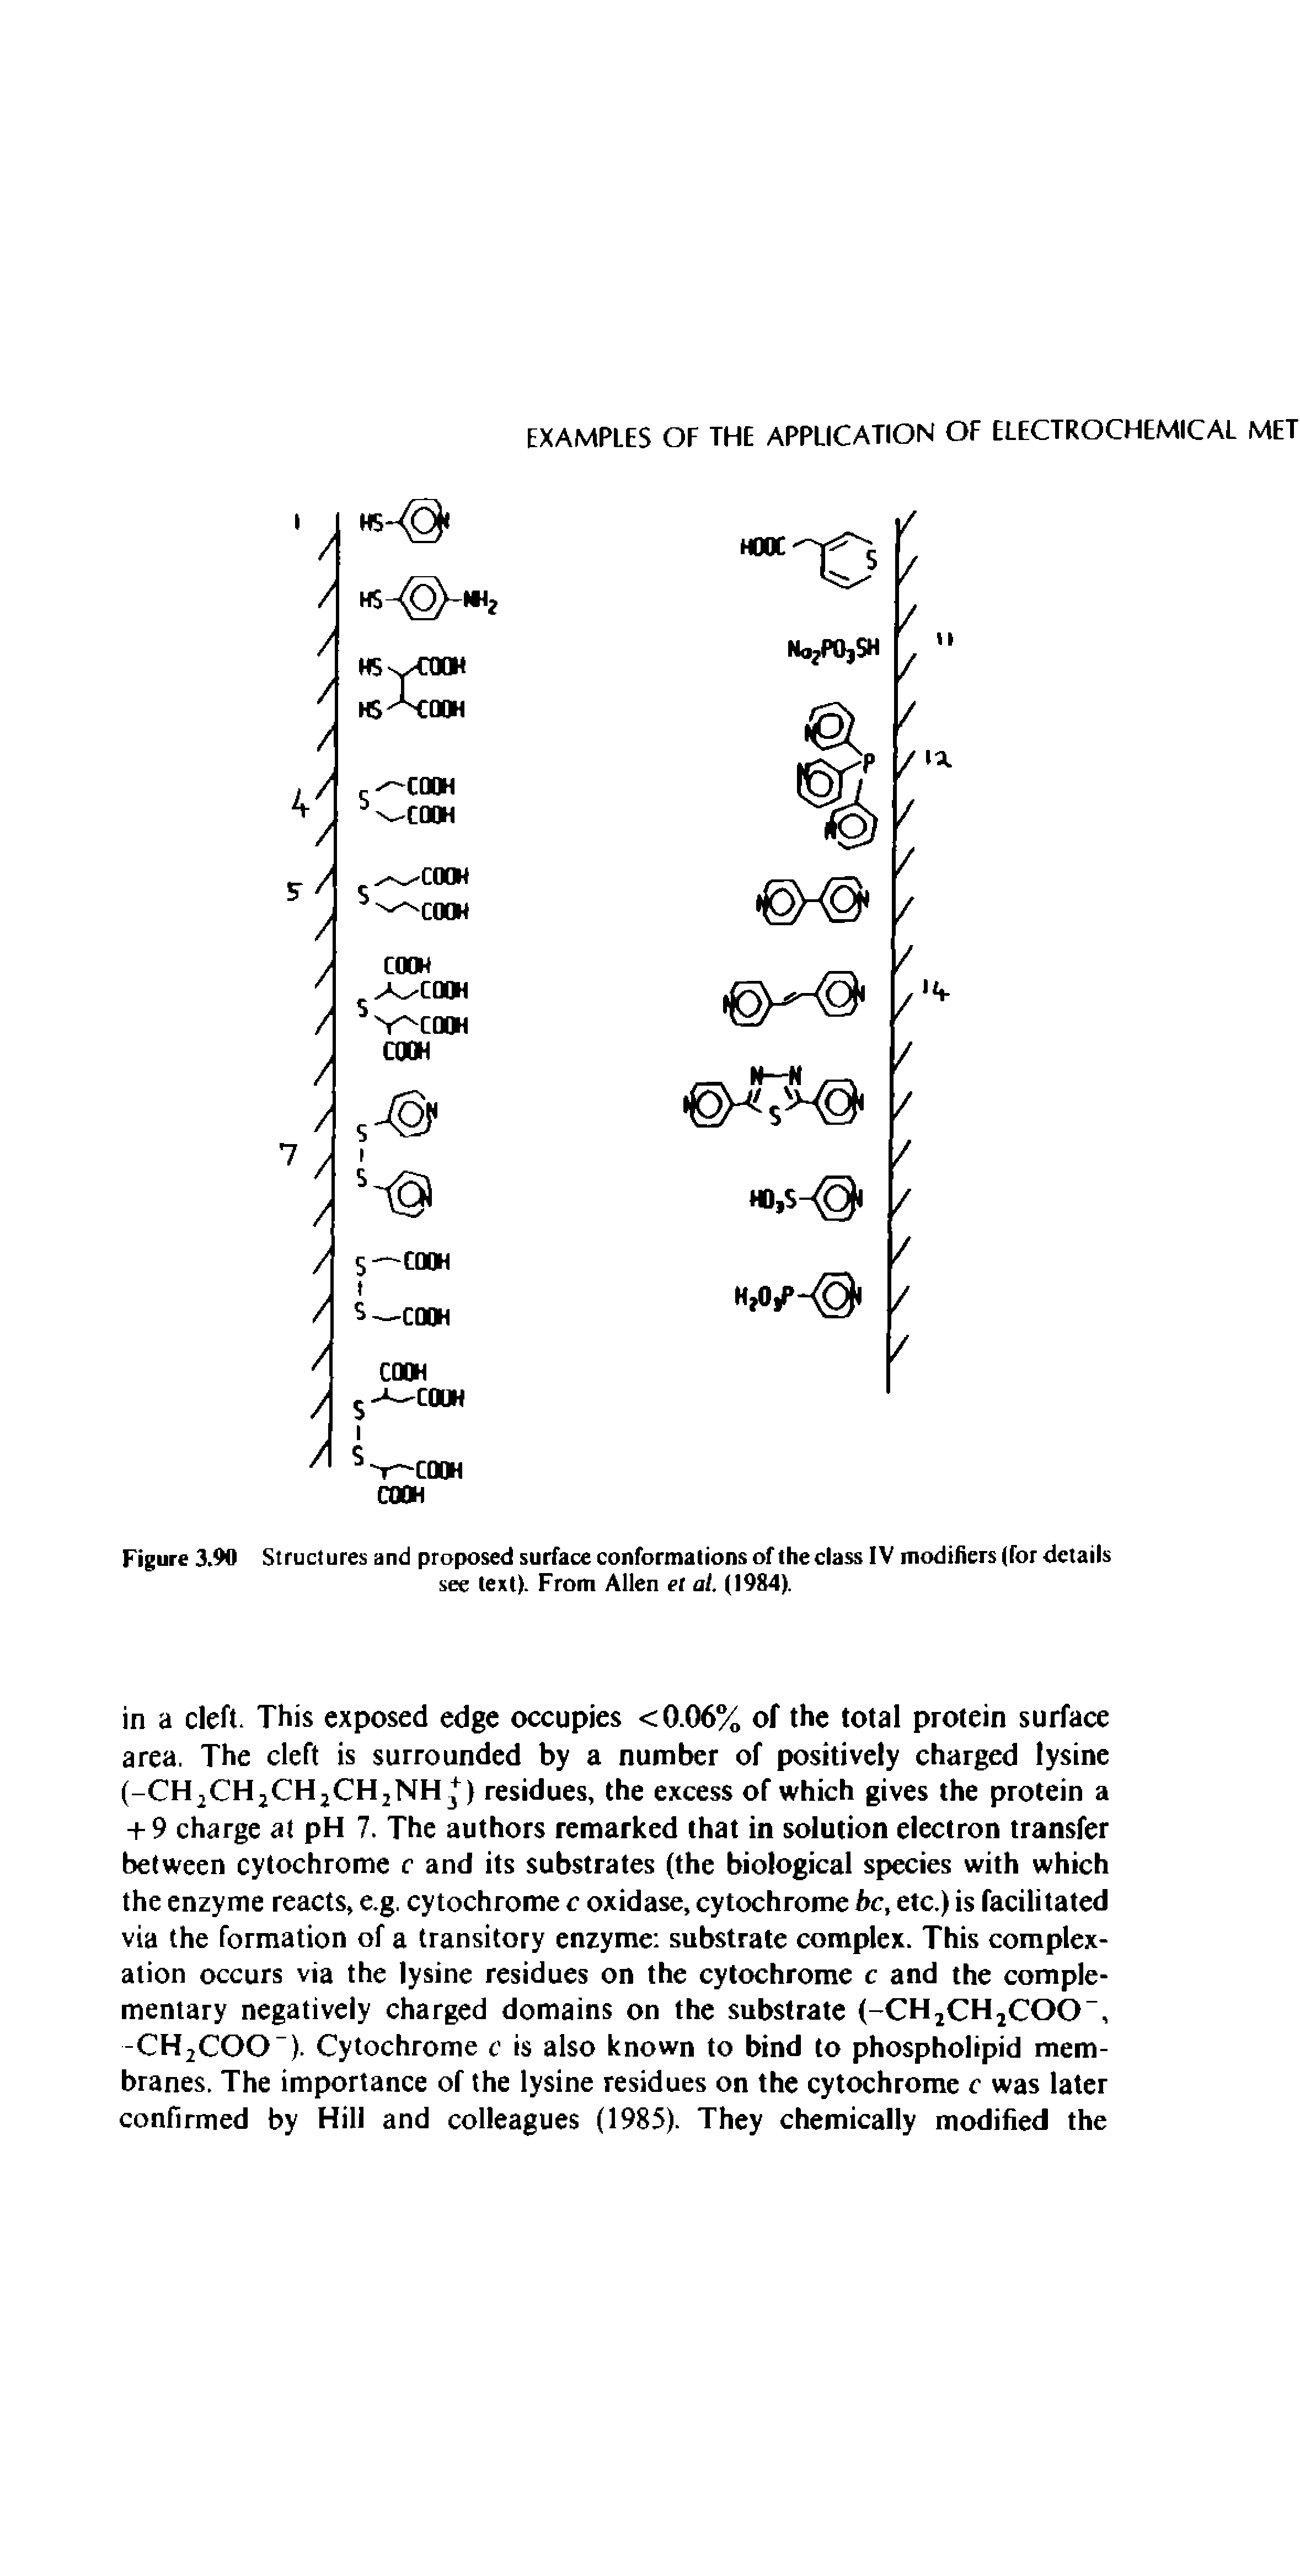 Figure 3.90 Structures and proposed surface conformations of the class IV modifiers (for details see text). From Allen el al. (1984).